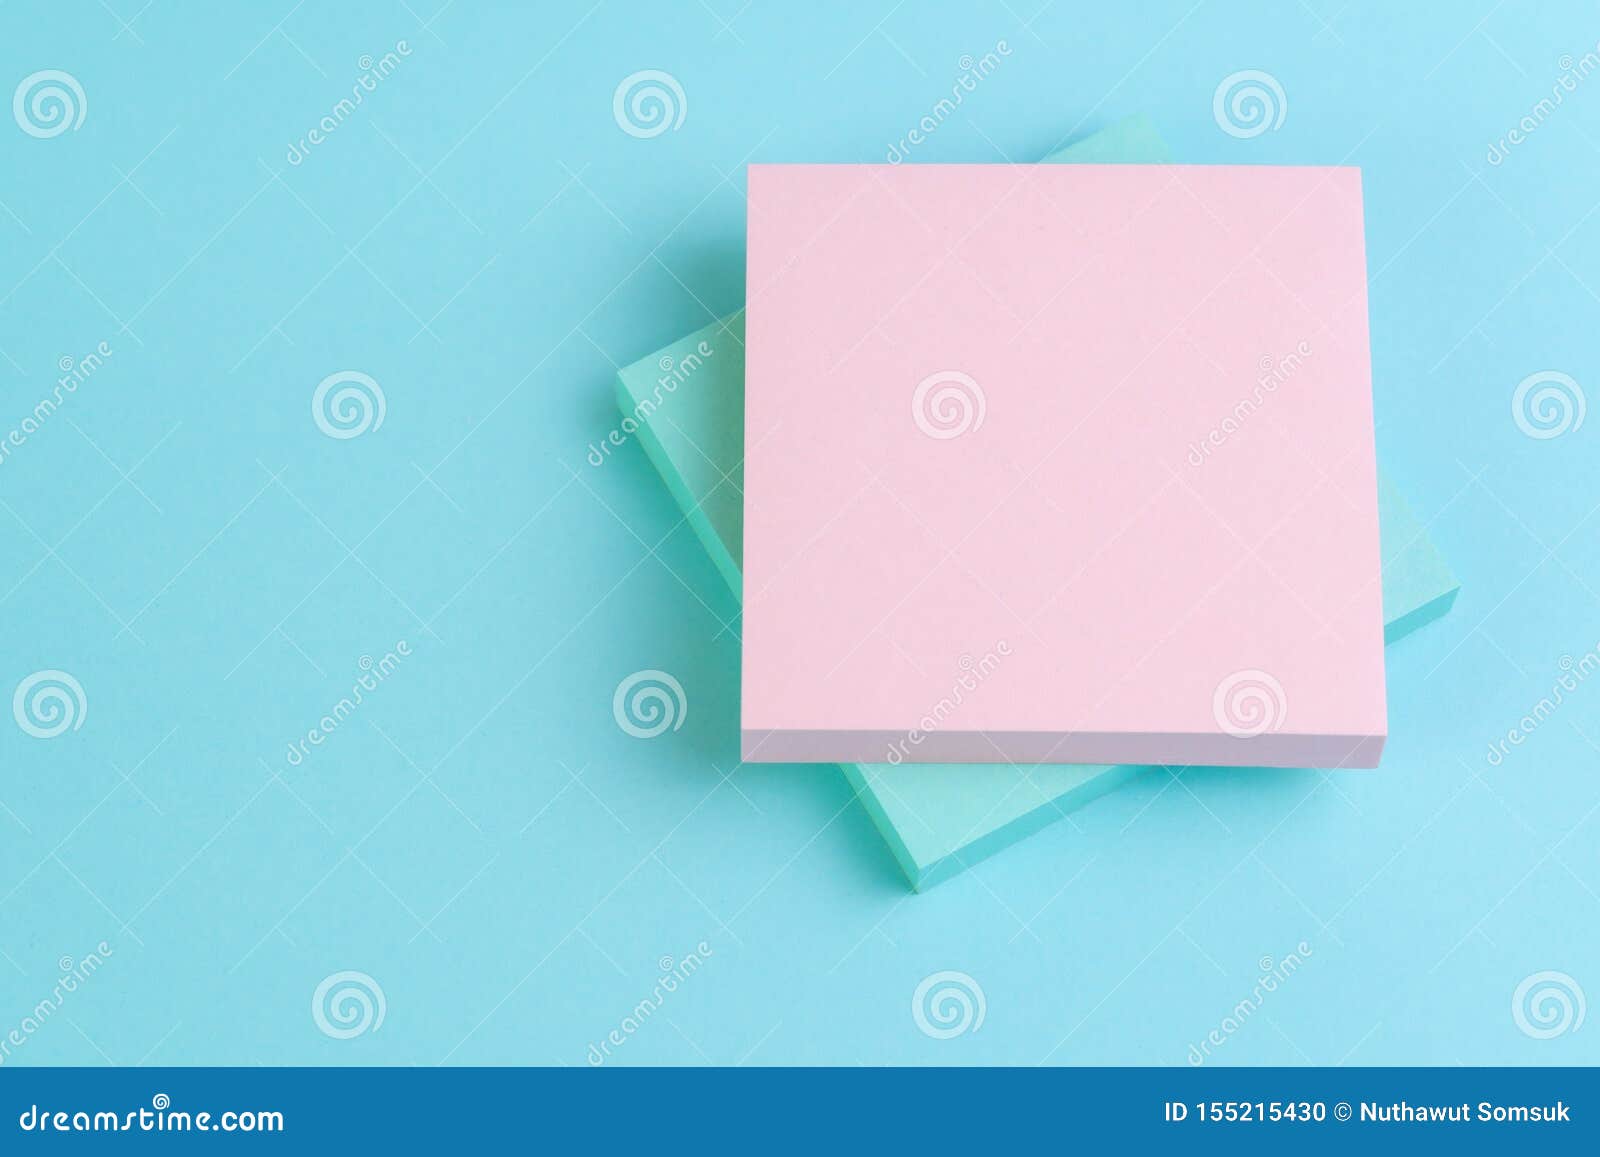 Stack of Sticky Notes on Blue Background with Pink on Top with Copy Space for Writing Message Using As Inspiration Text, Memo, Stock Photo - Image notepad, information: 155215430